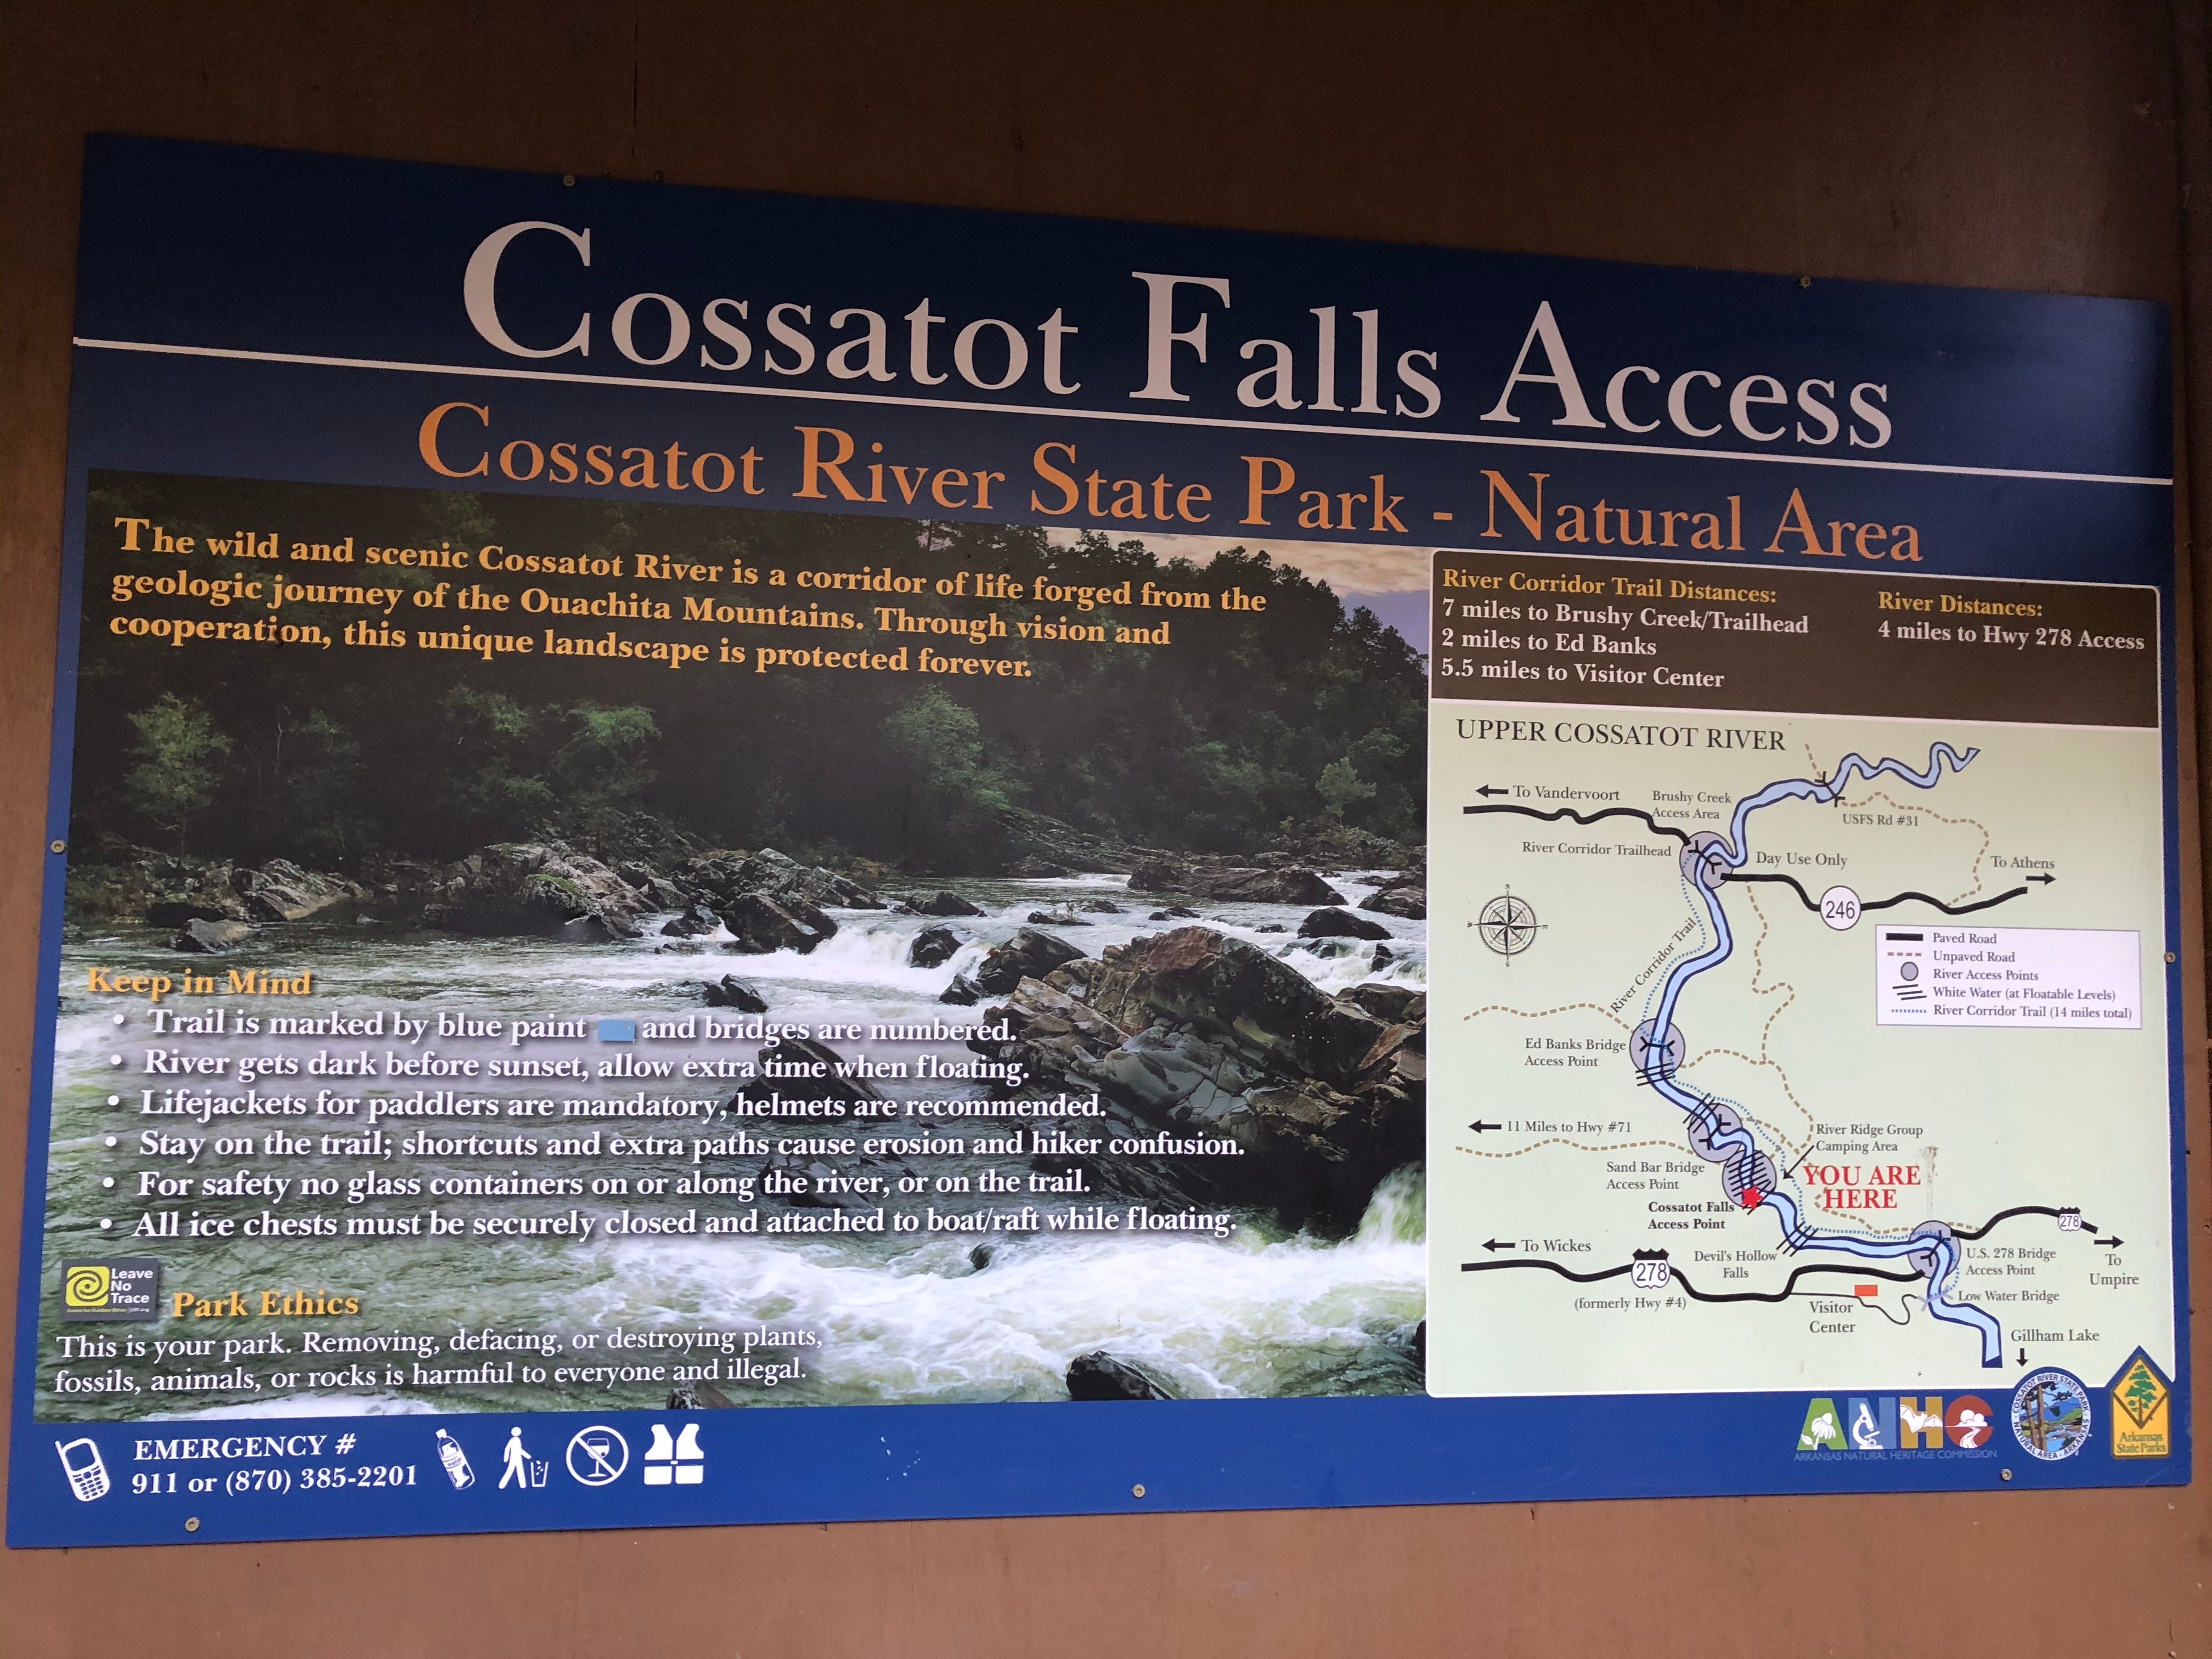 Camper submitted image from Cossatot Falls Campsites — Cossatot River State Park - Natural Area - 1